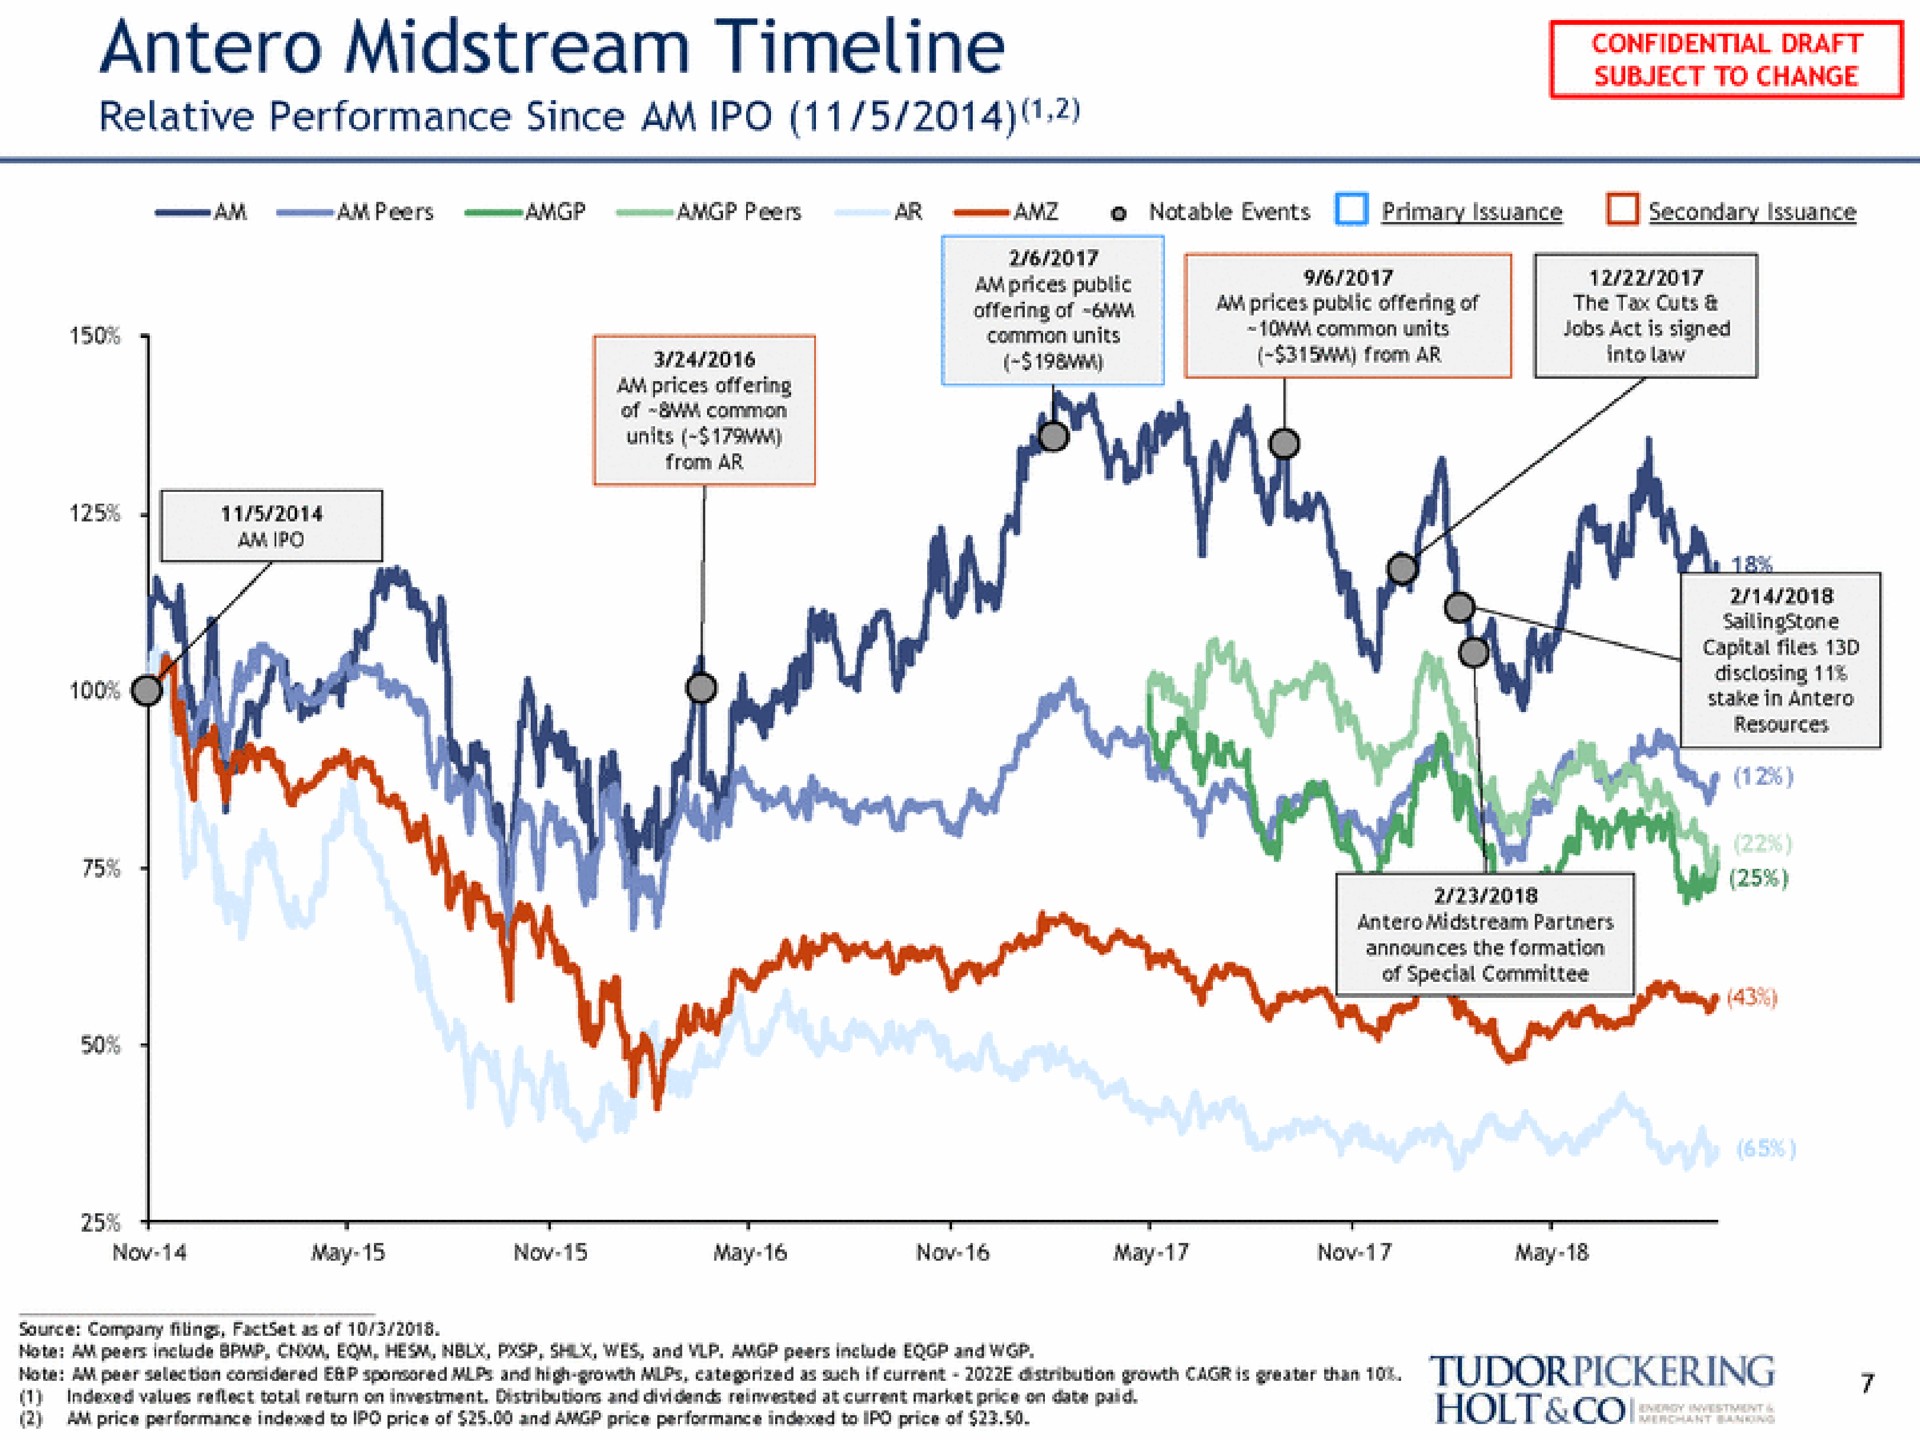 midstream relative performance since am at | Tudor, Pickering, Holt & Co